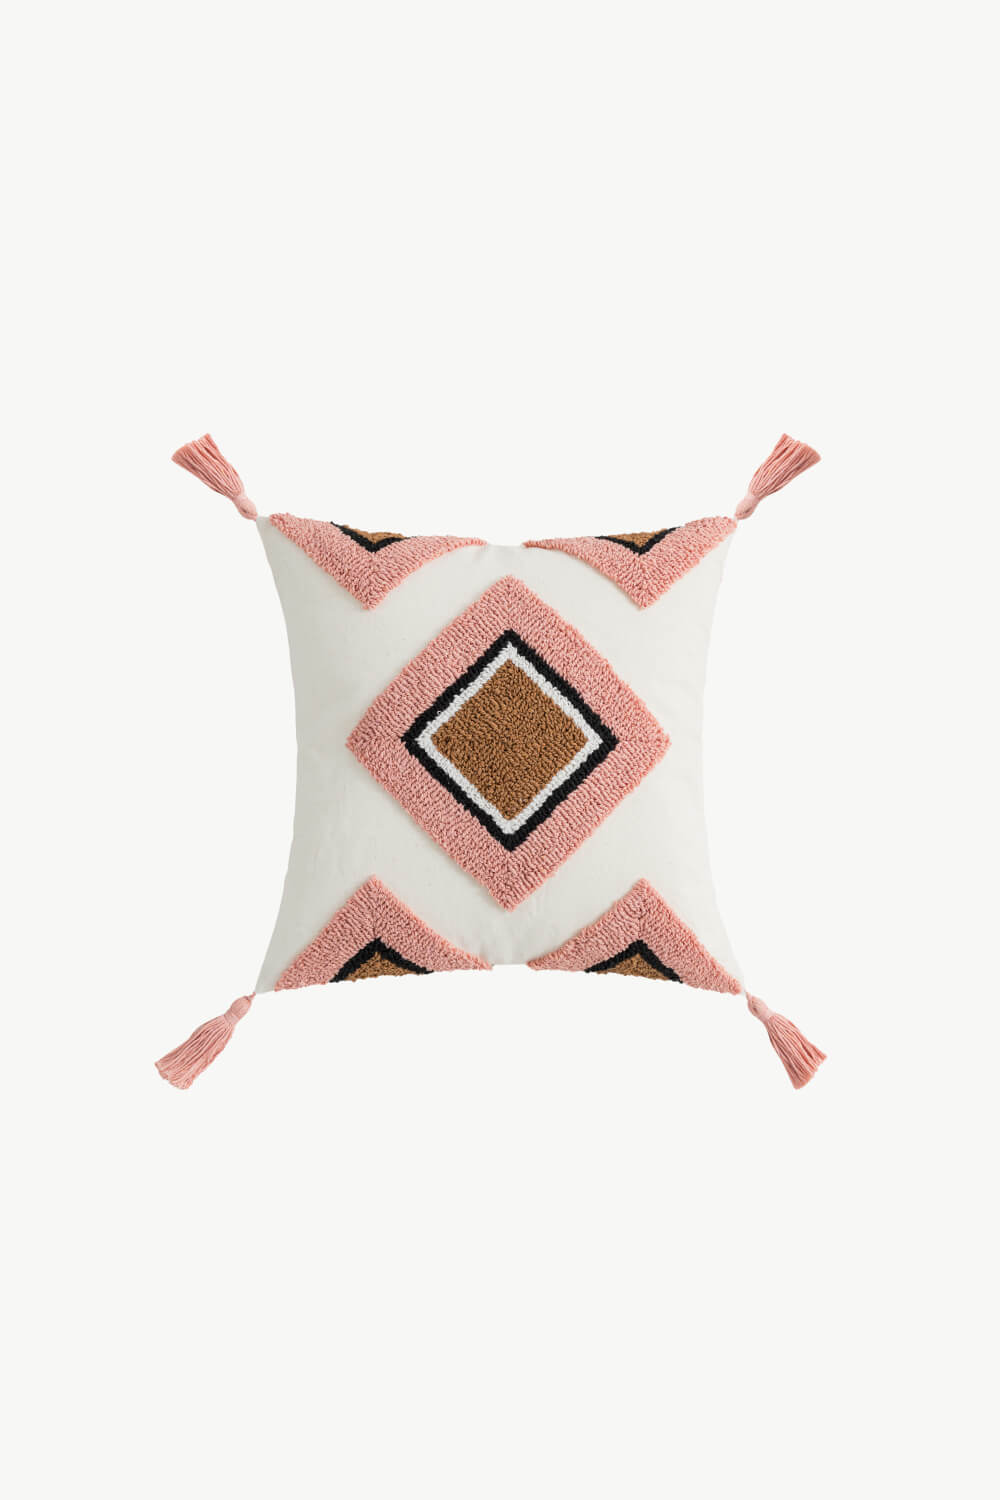 Peaceful Living Throw Pillow Case | 4 Styles |